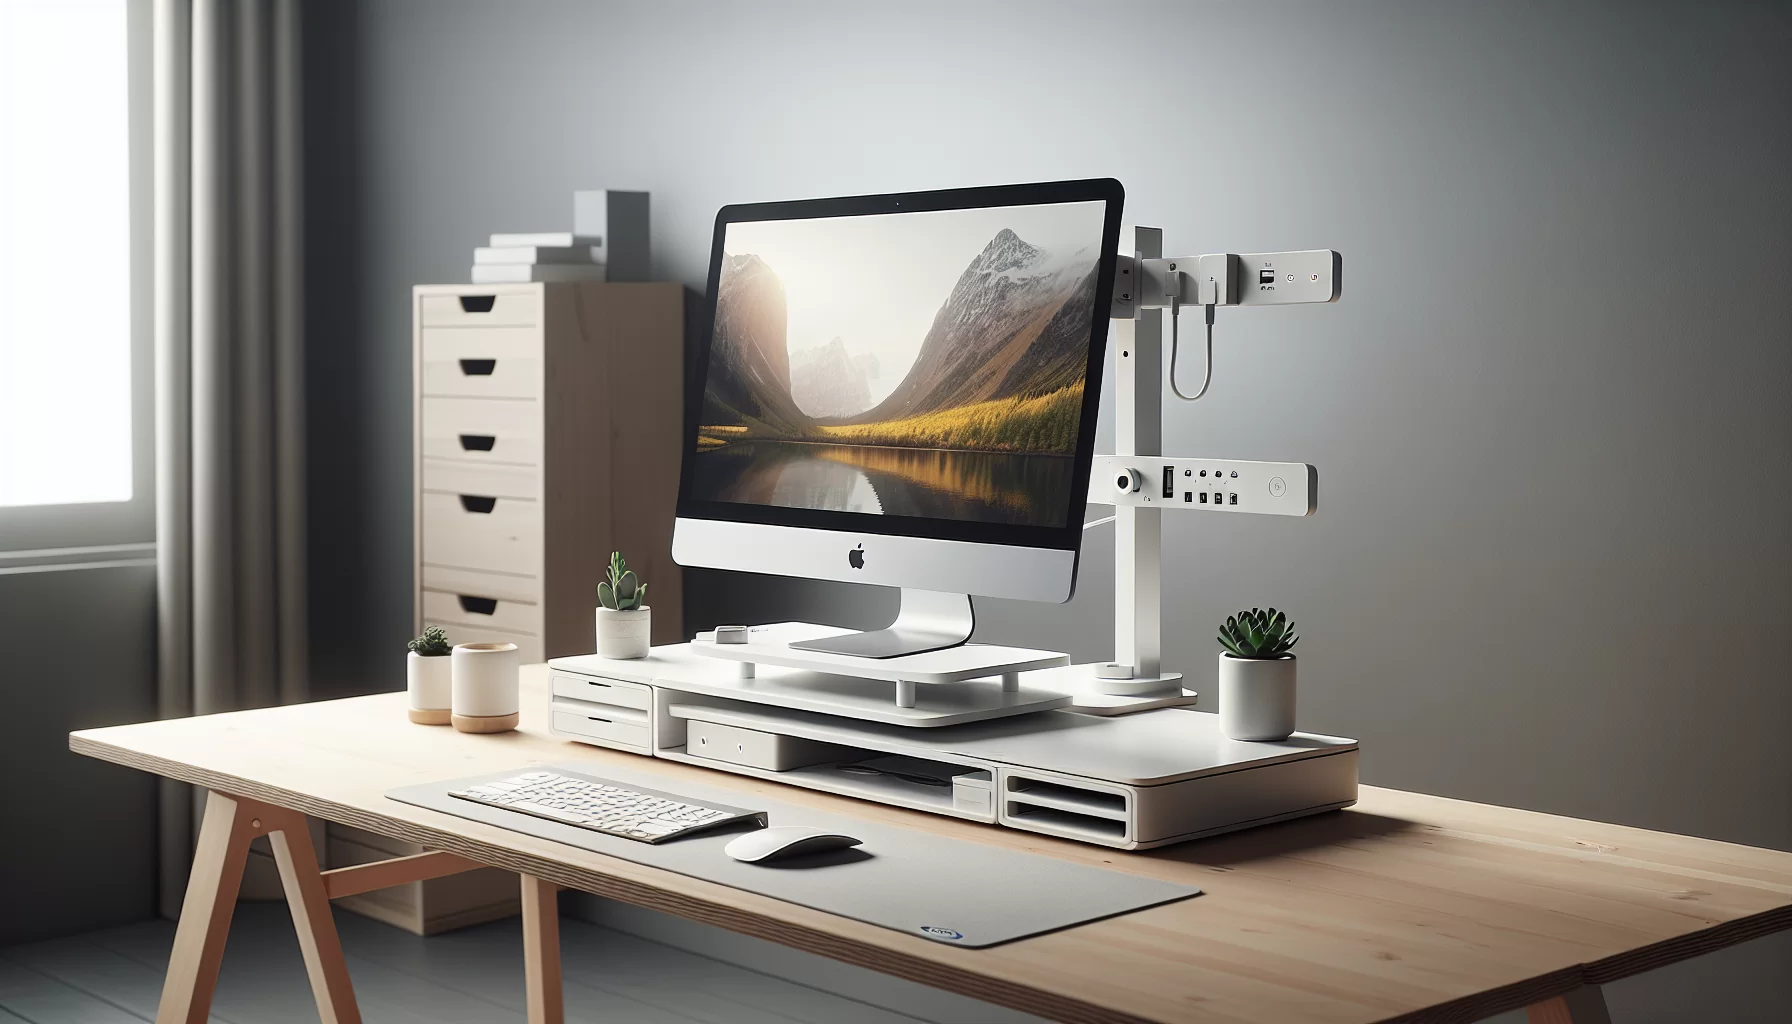 Discover IKEA's sustainable Elloven monitor stand for your home office